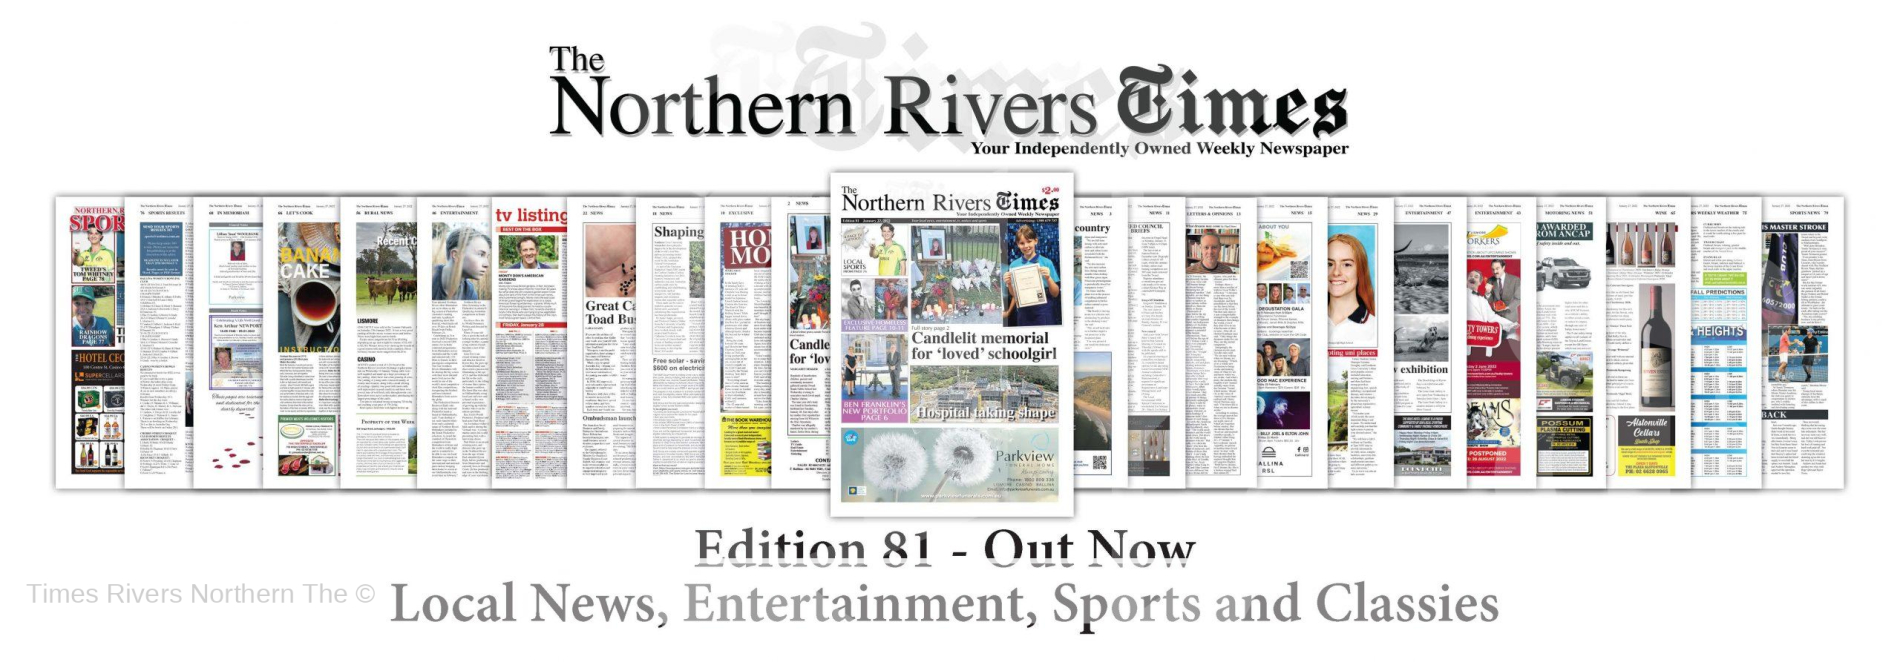 The Northern Rivers Times